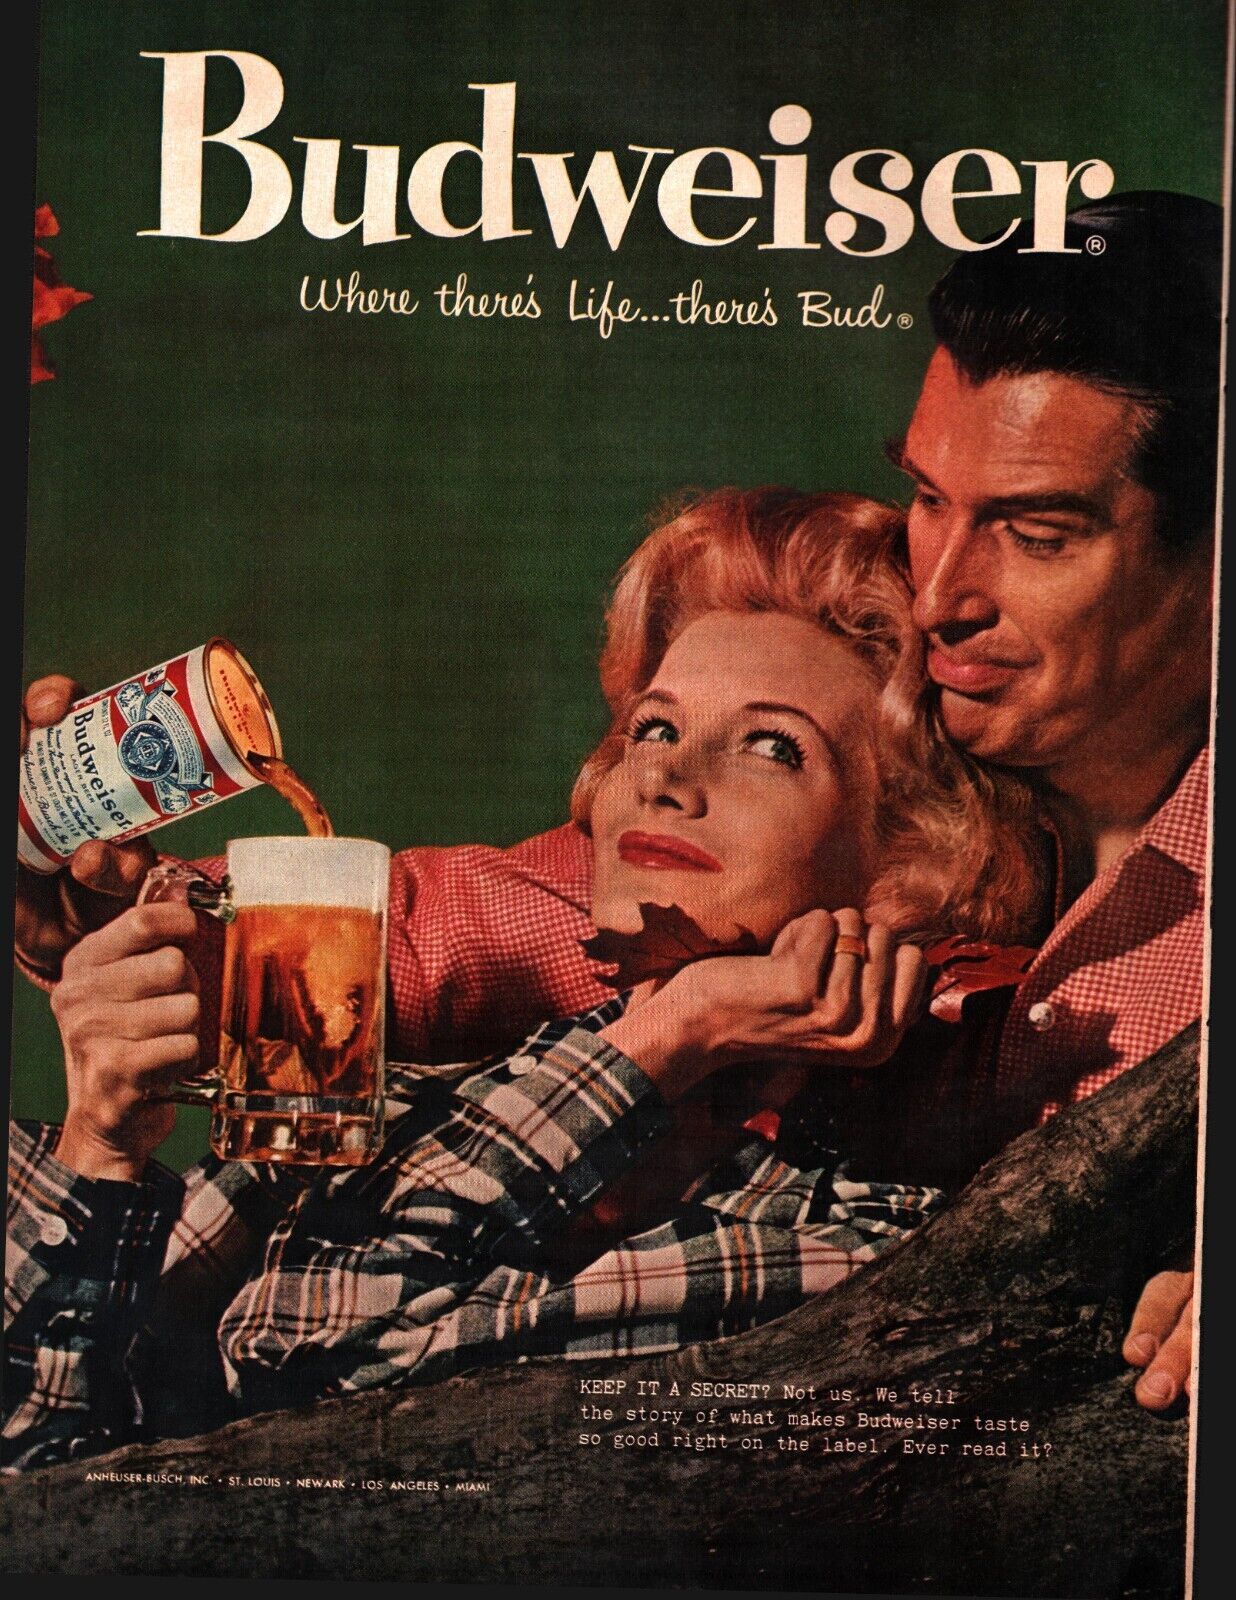 1958 Budweiser Bud Beer Brewery Vintage Print Ad Anheuser Busch St. Louis MO USA - $25.98